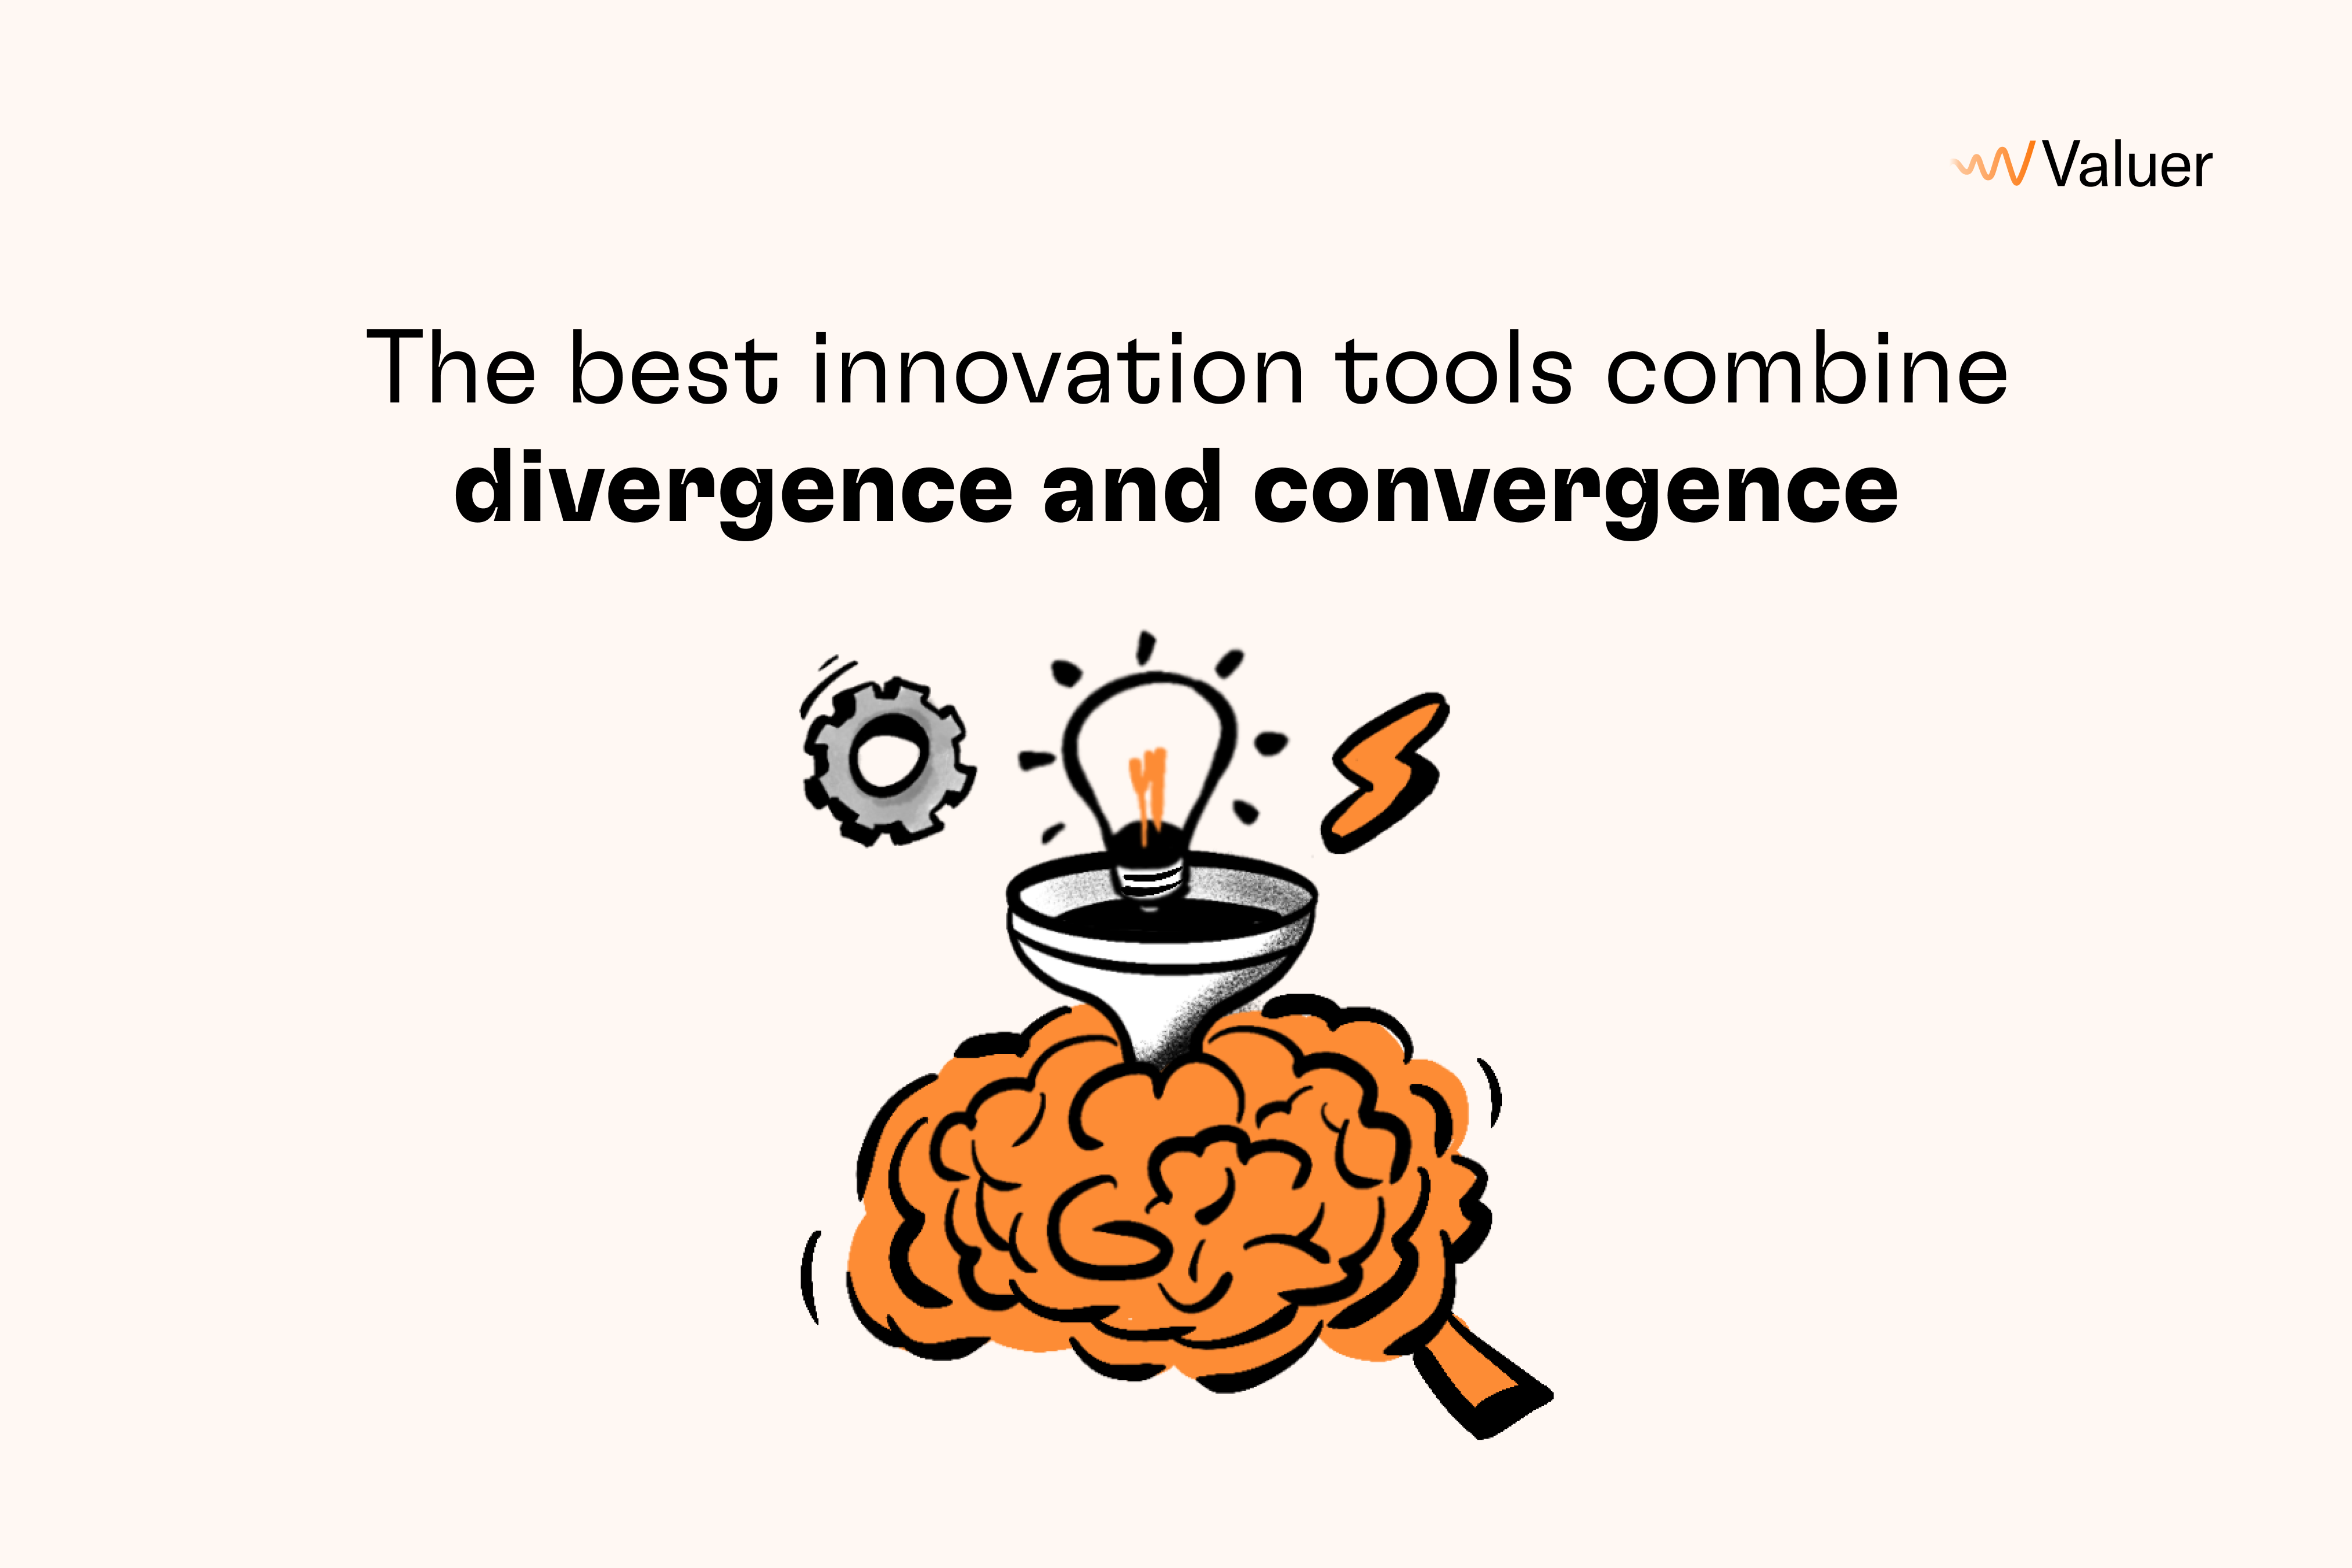 The best innovation tools combine divergence and convergence